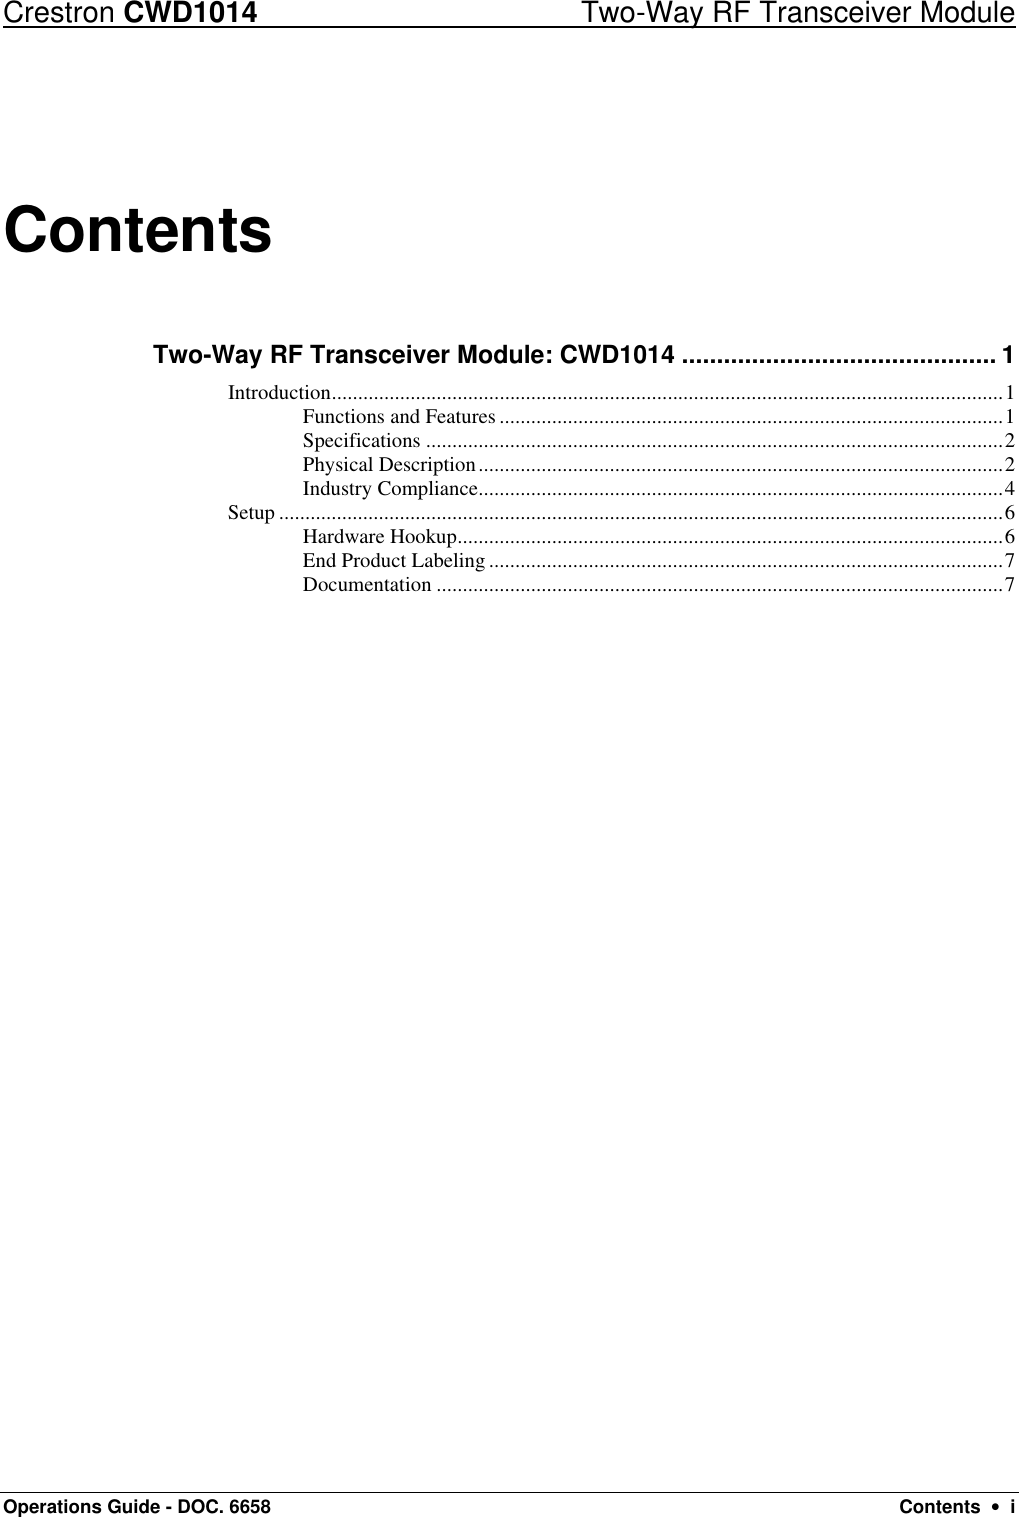 Crestron CWD1014 Two-Way RF Transceiver Module Operations Guide - DOC. 6658 Contents  •  i Contents Two-Way RF Transceiver Module: CWD1014 ............................................. 1 Introduction................................................................................................................................1 Functions and Features ................................................................................................1 Specifications ..............................................................................................................2 Physical Description....................................................................................................2 Industry Compliance....................................................................................................4 Setup ..........................................................................................................................................6 Hardware Hookup........................................................................................................6 End Product Labeling ..................................................................................................7 Documentation ............................................................................................................7 